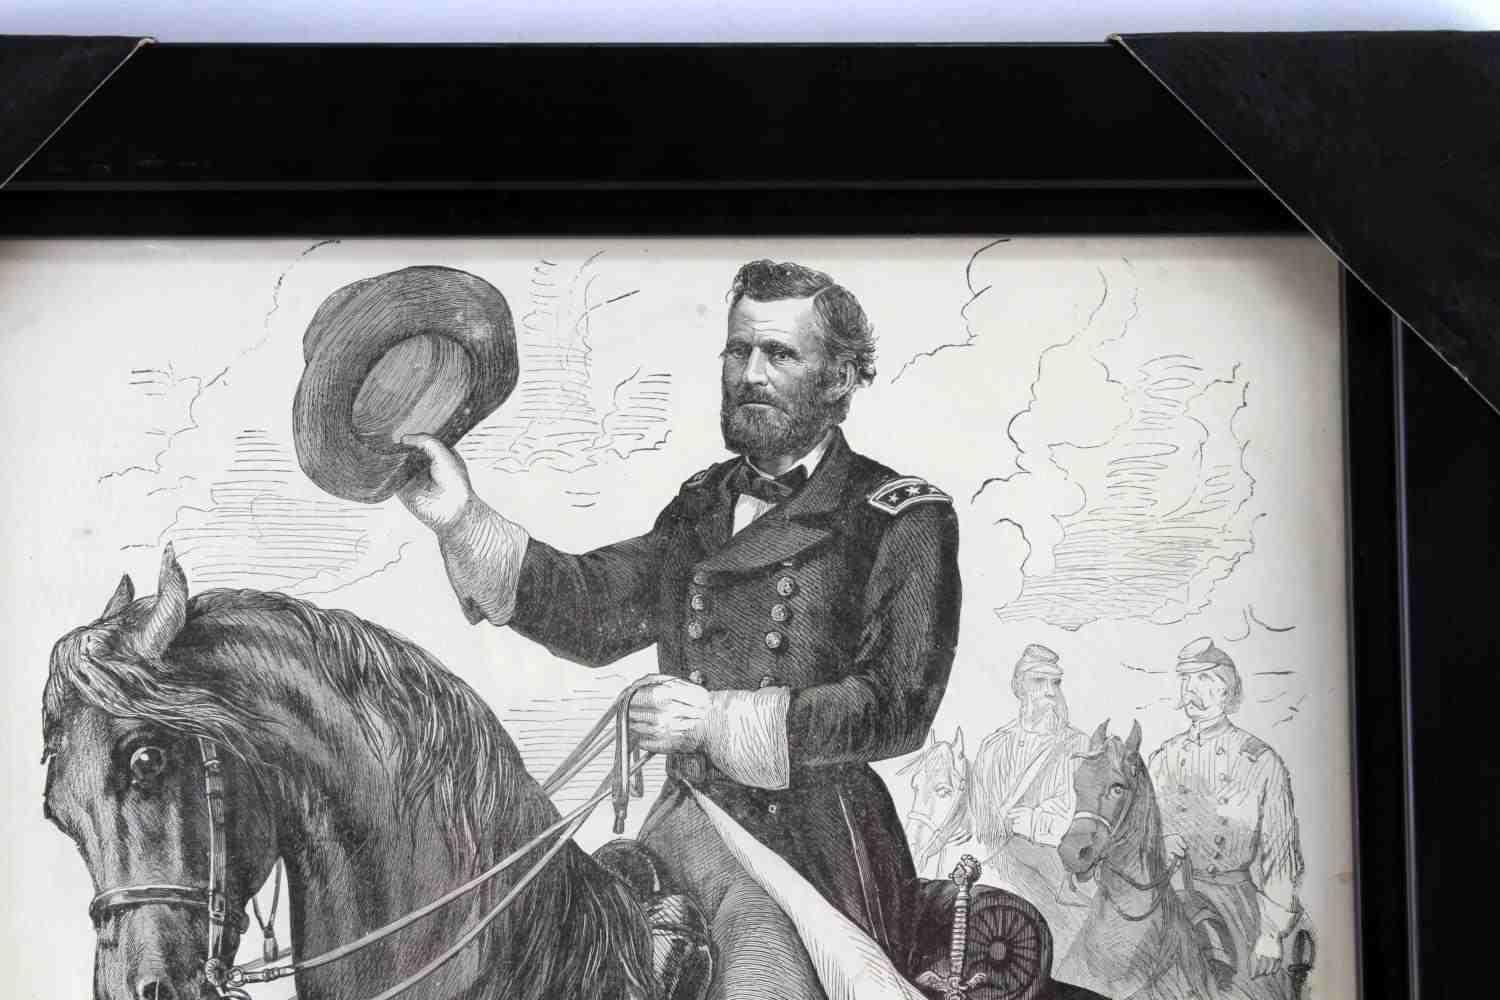 PRINT OF GENERAL ULYSSES S GRANT ETCHING